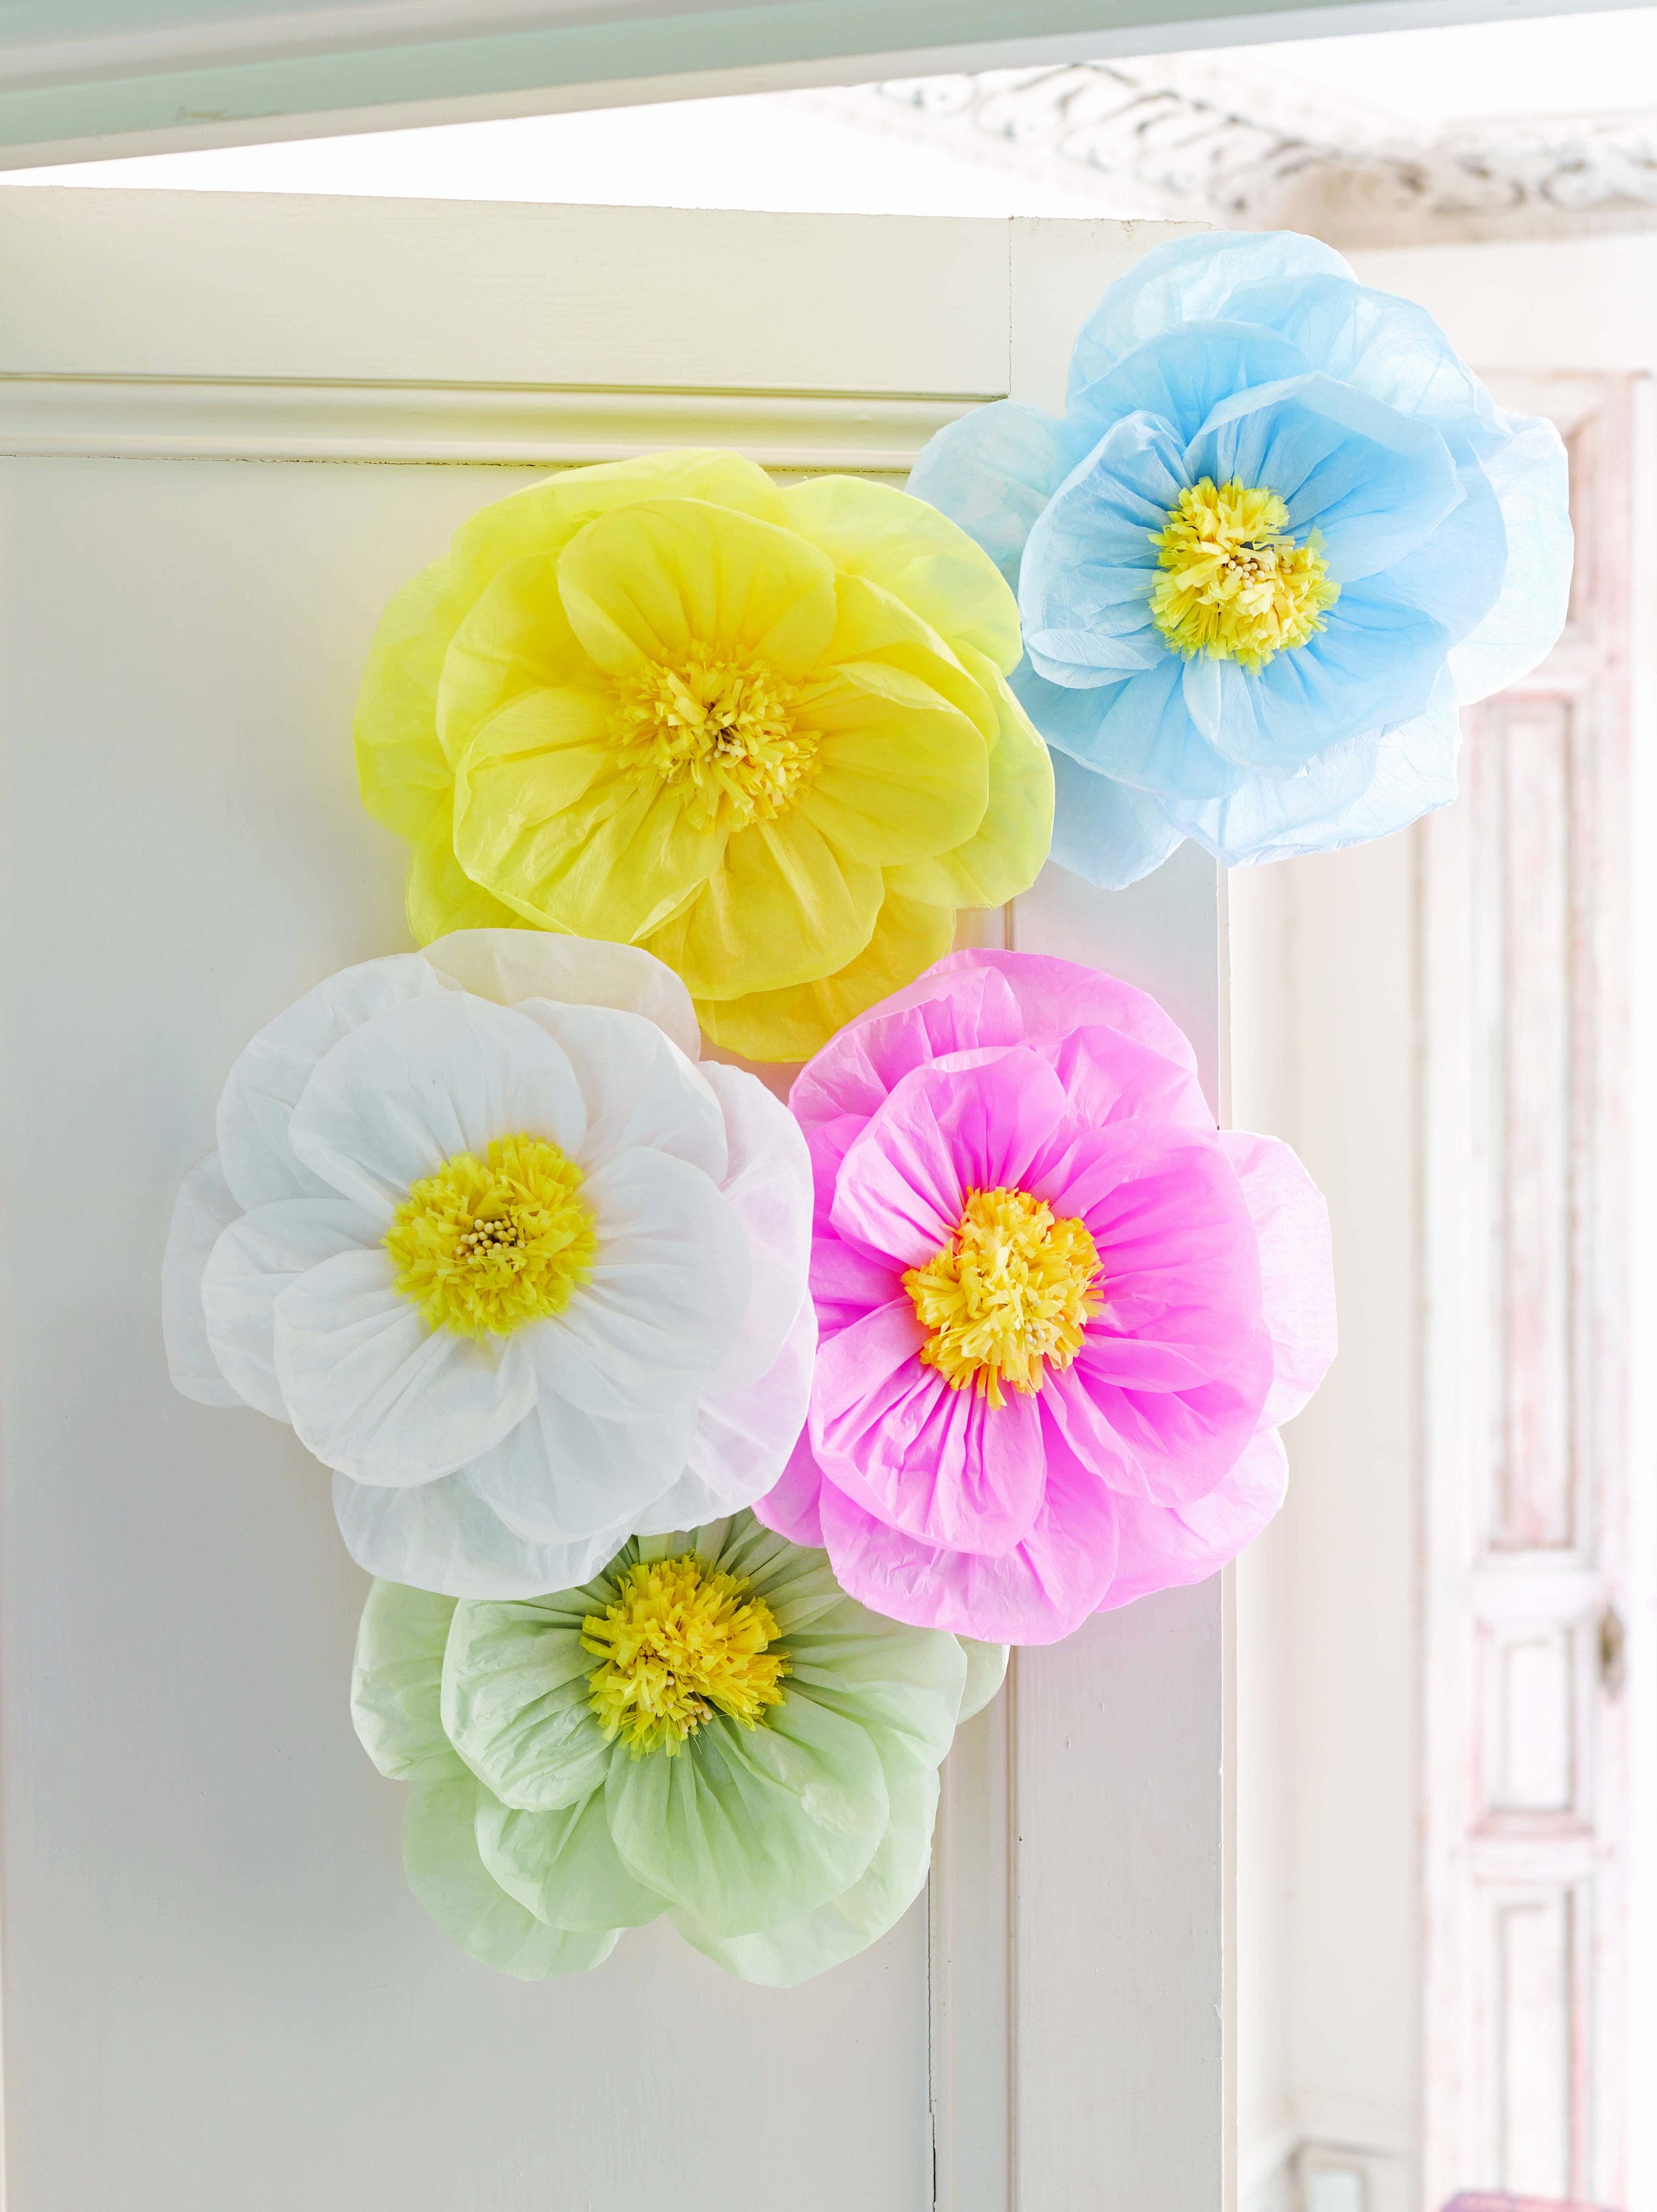 5 Tissue Paper Flowers, Artificial Flowers Wall Decor, Flower Decorations,  Wedding Decor, Paper Wall Flowers, Easter Decor, Floral Backdrop 